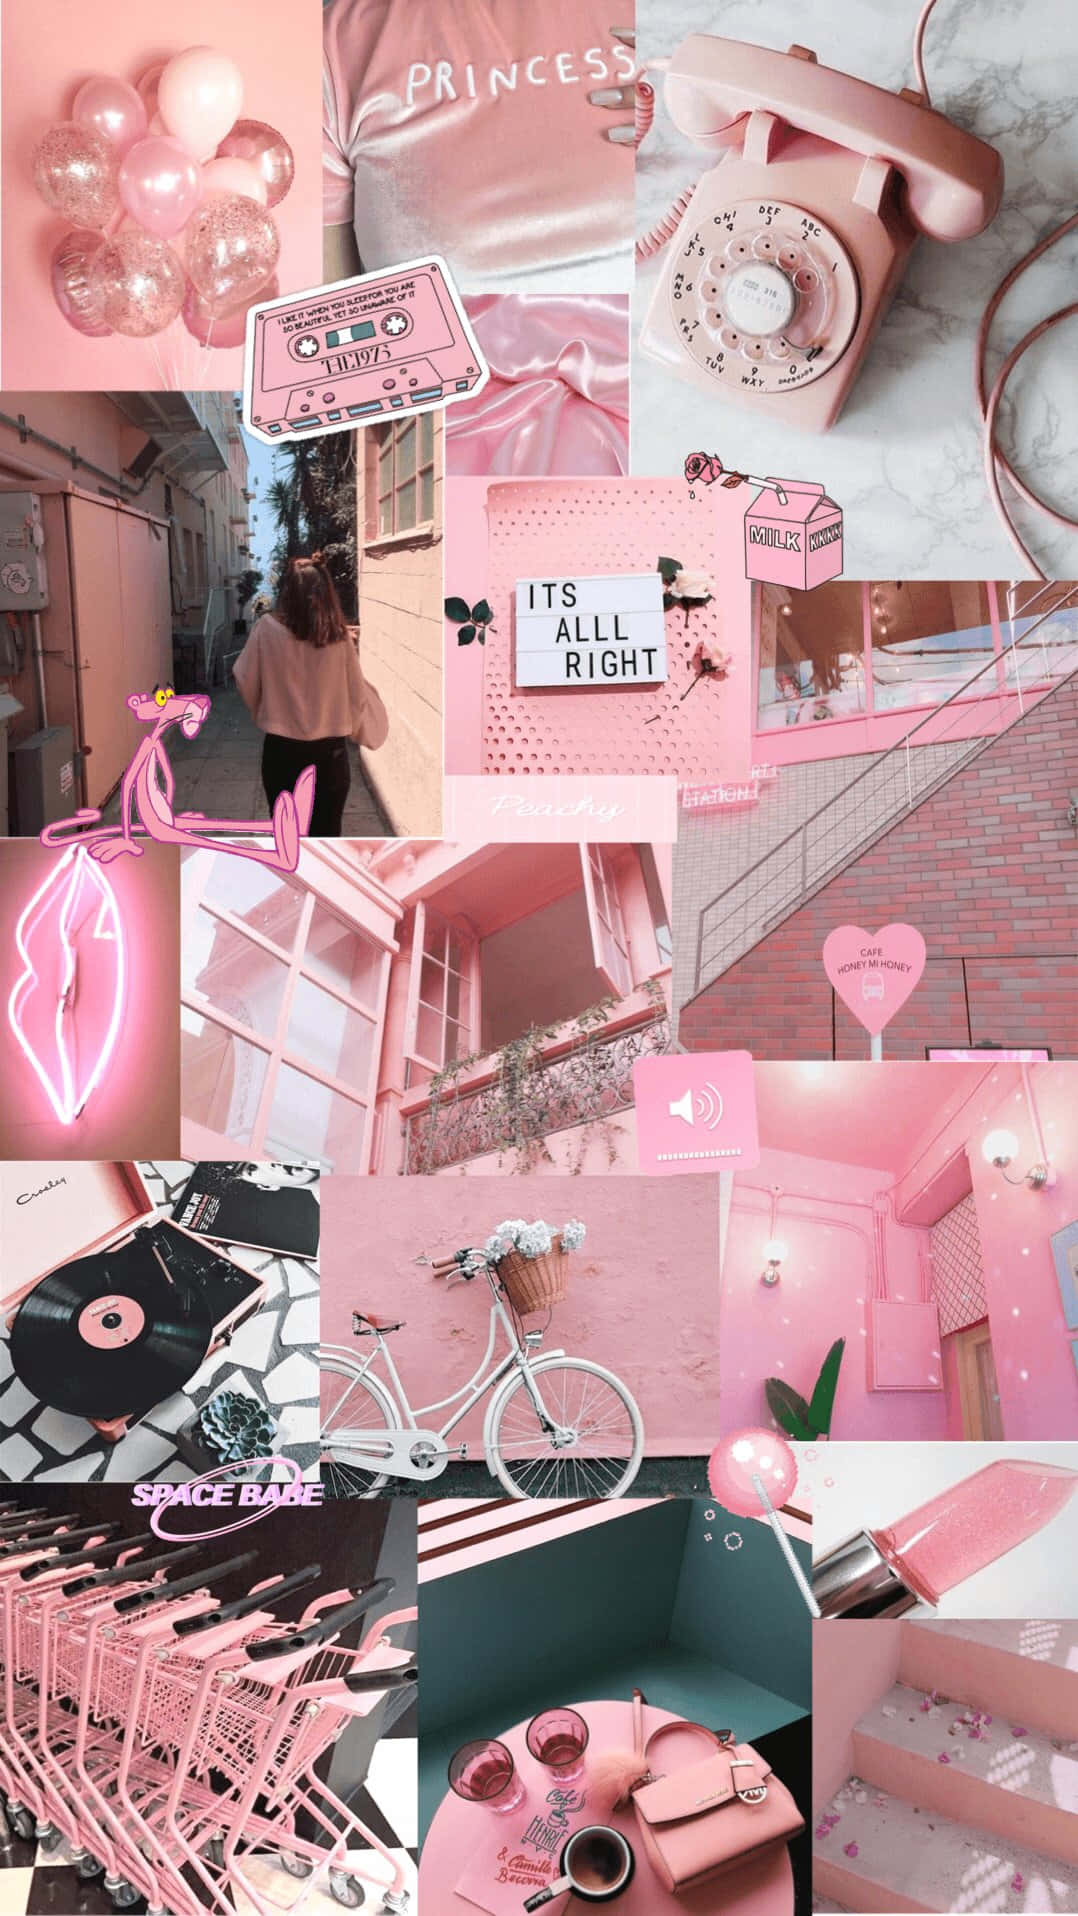 "Feeling the pastel pink aesthetic"